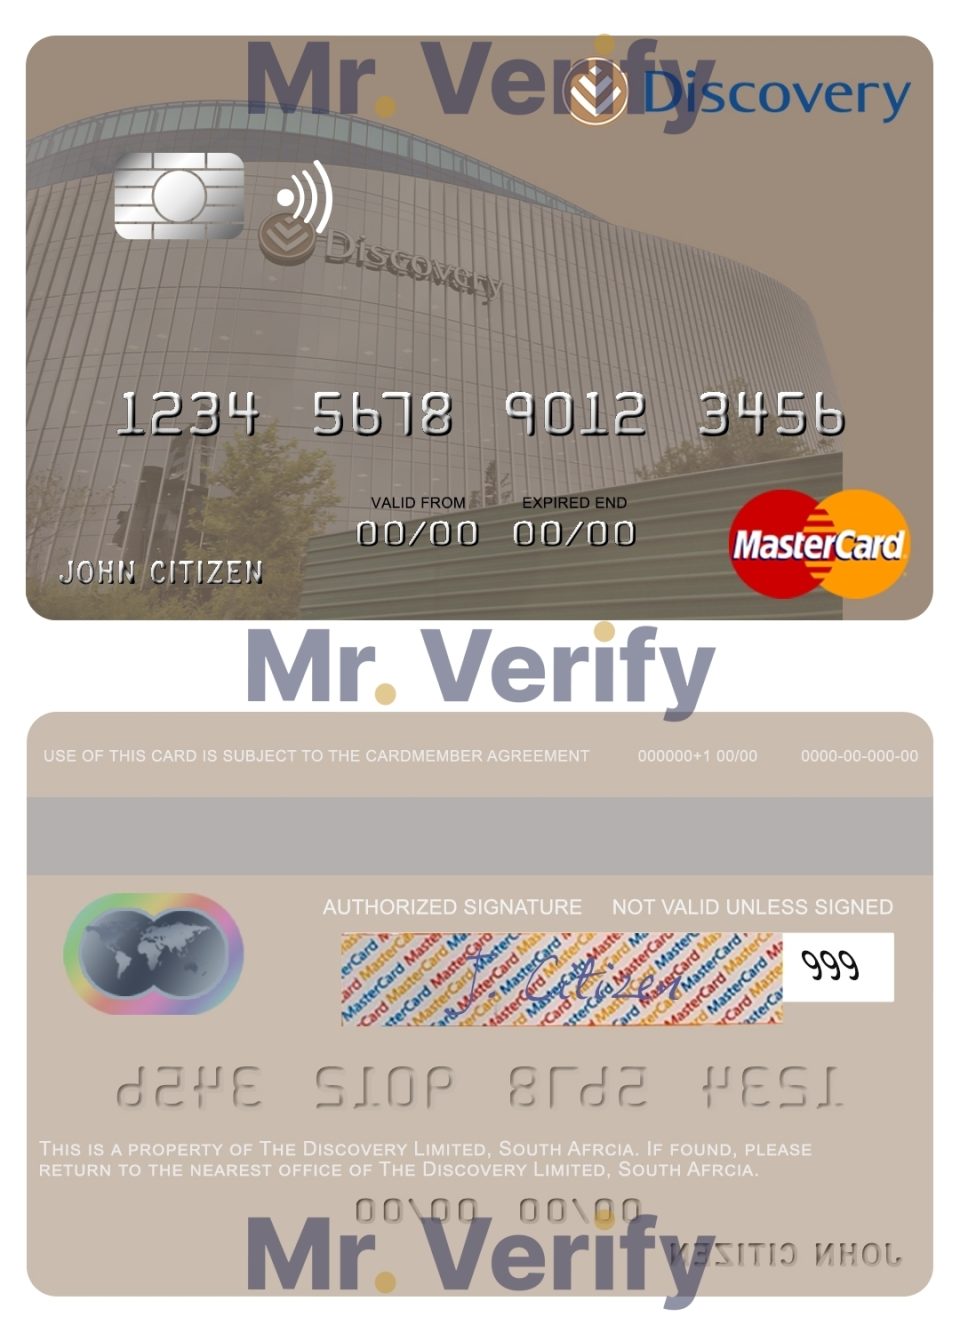 Editable South Africa Discovery Limited mastercard credit card Templates in PSD Format